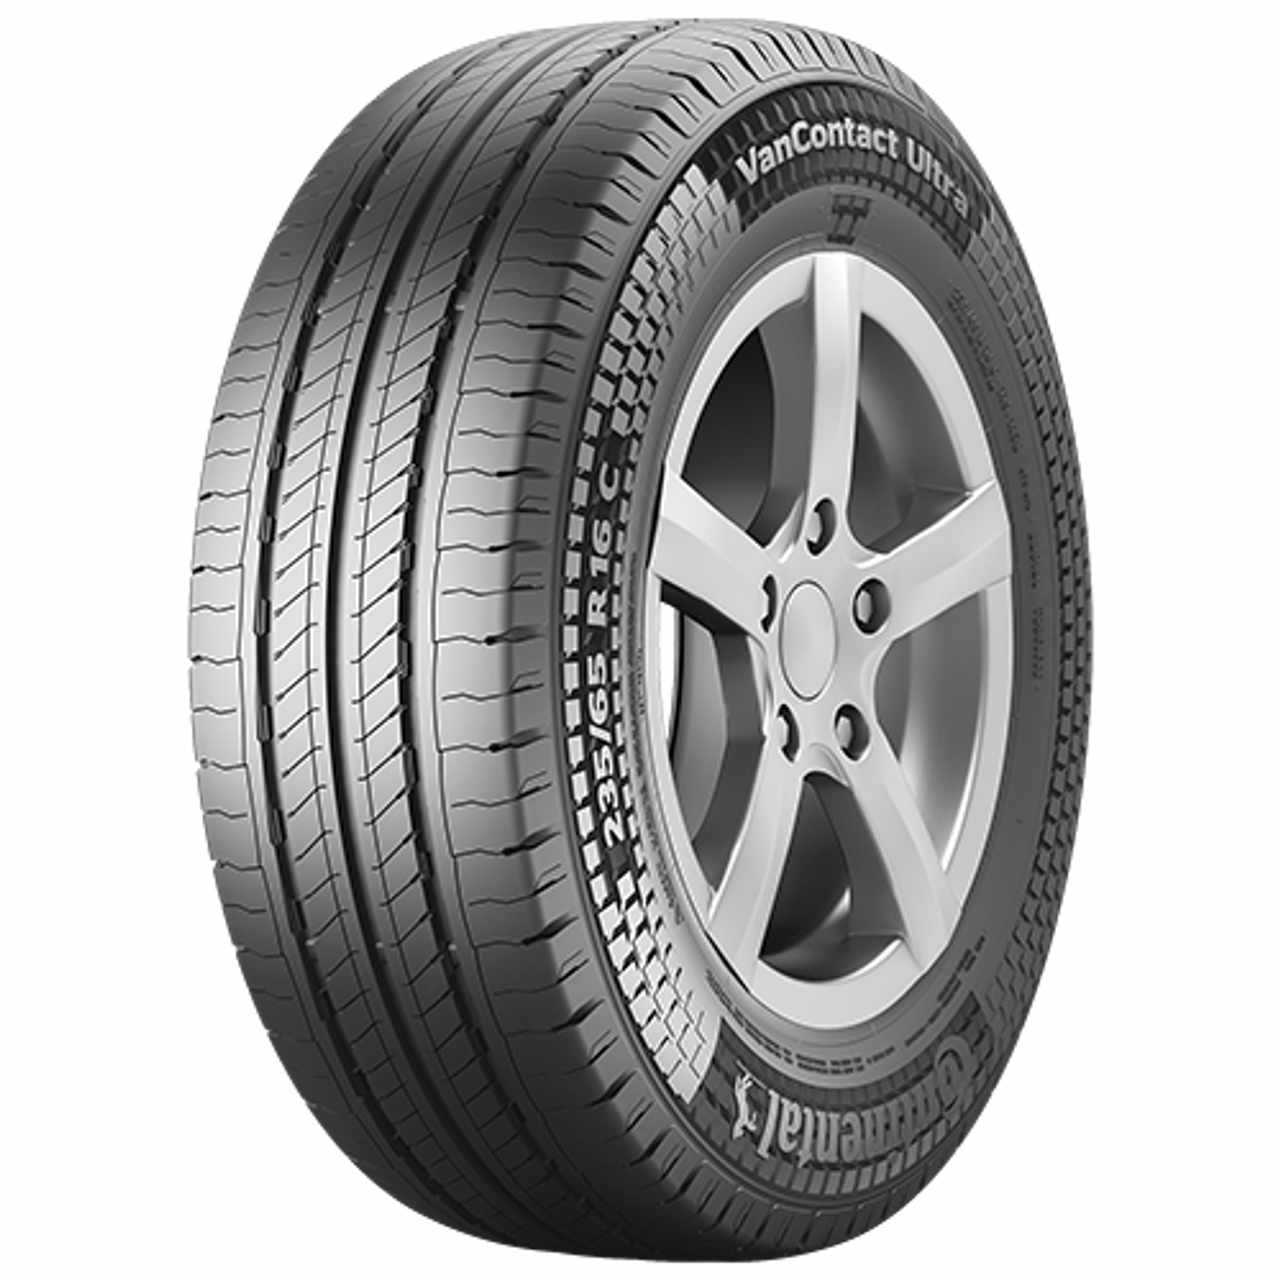 CONTINENTAL VANCONTACT ULTRA 225/65R16C 112R BSW